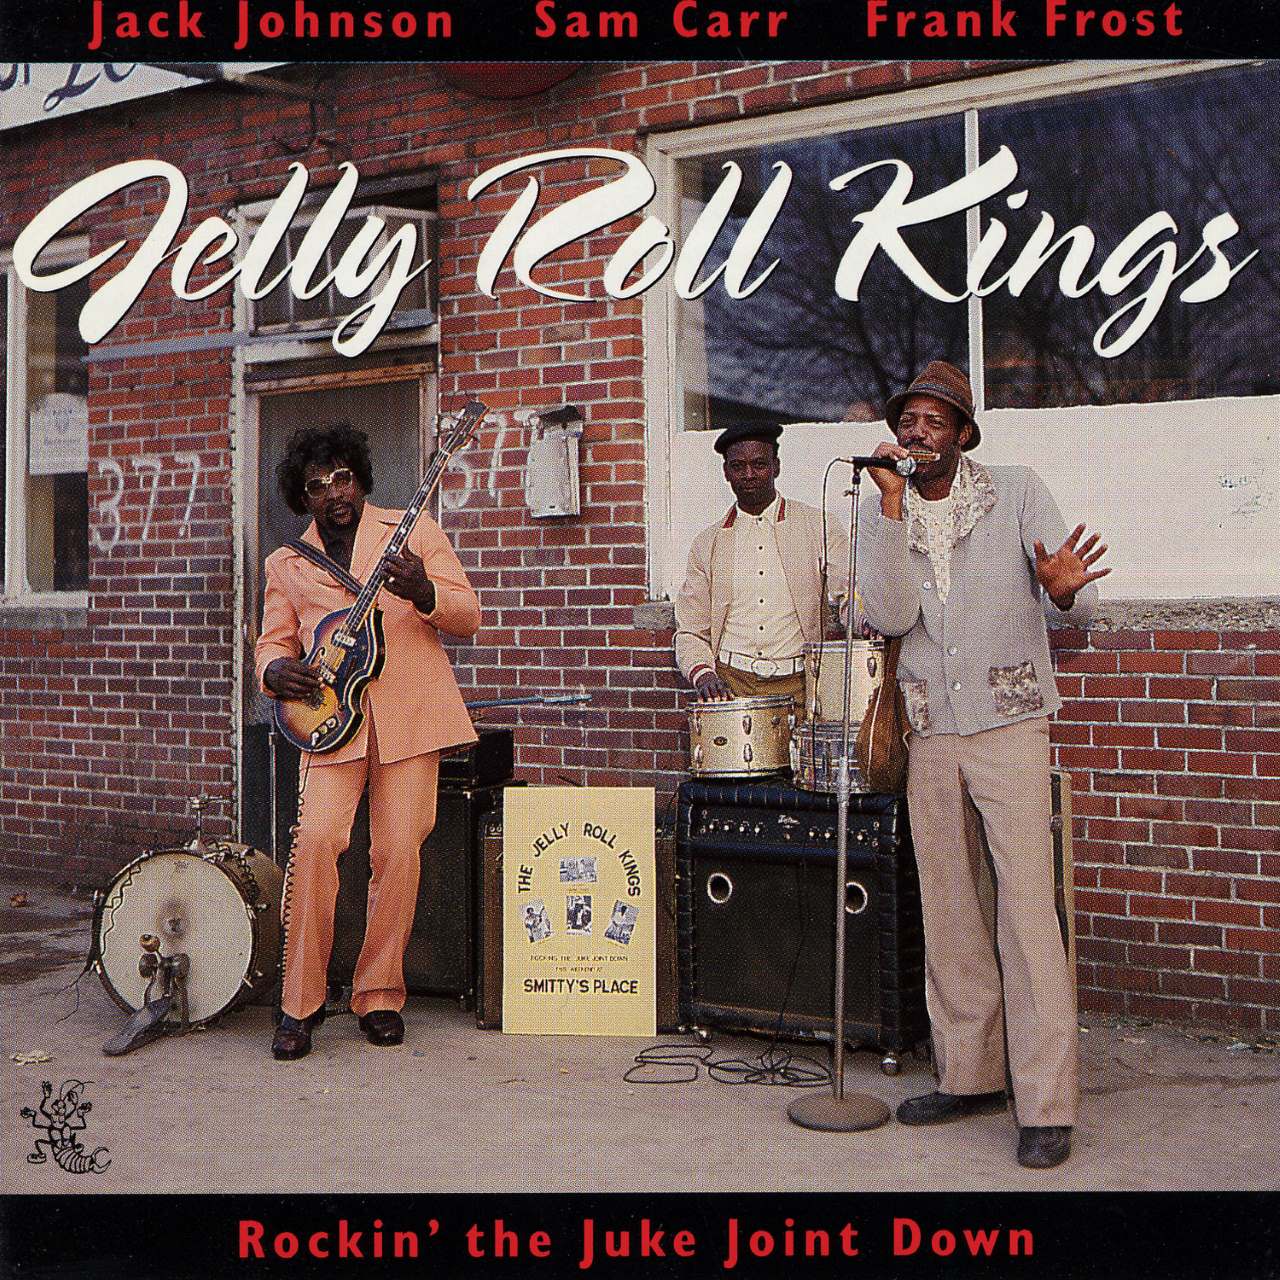 Jelly Roll Kings – Rockin’ The Juke Joint Down cover album